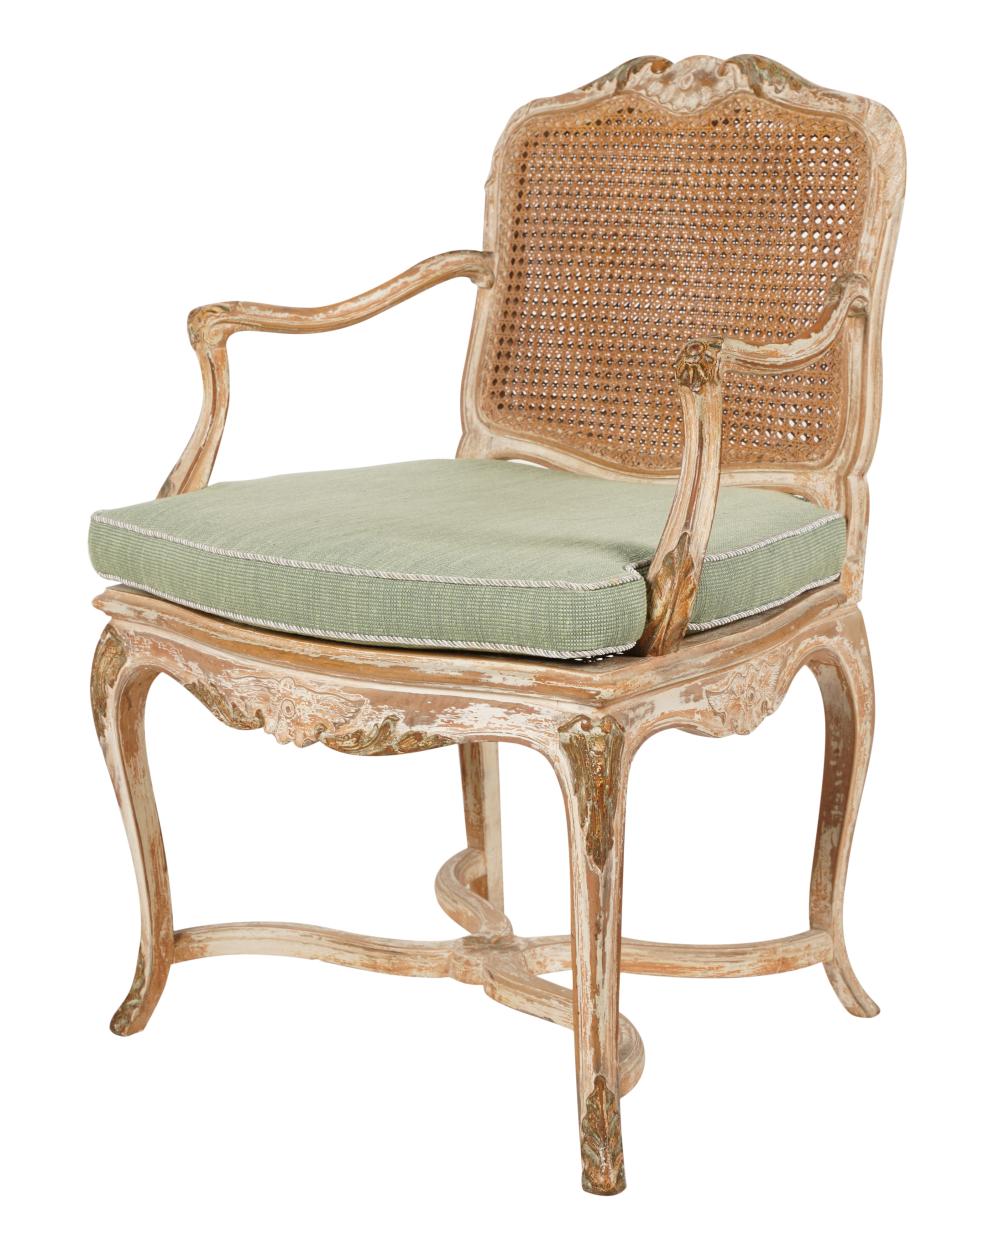 FRENCH PROVINCIAL-STYLE BLEACHED